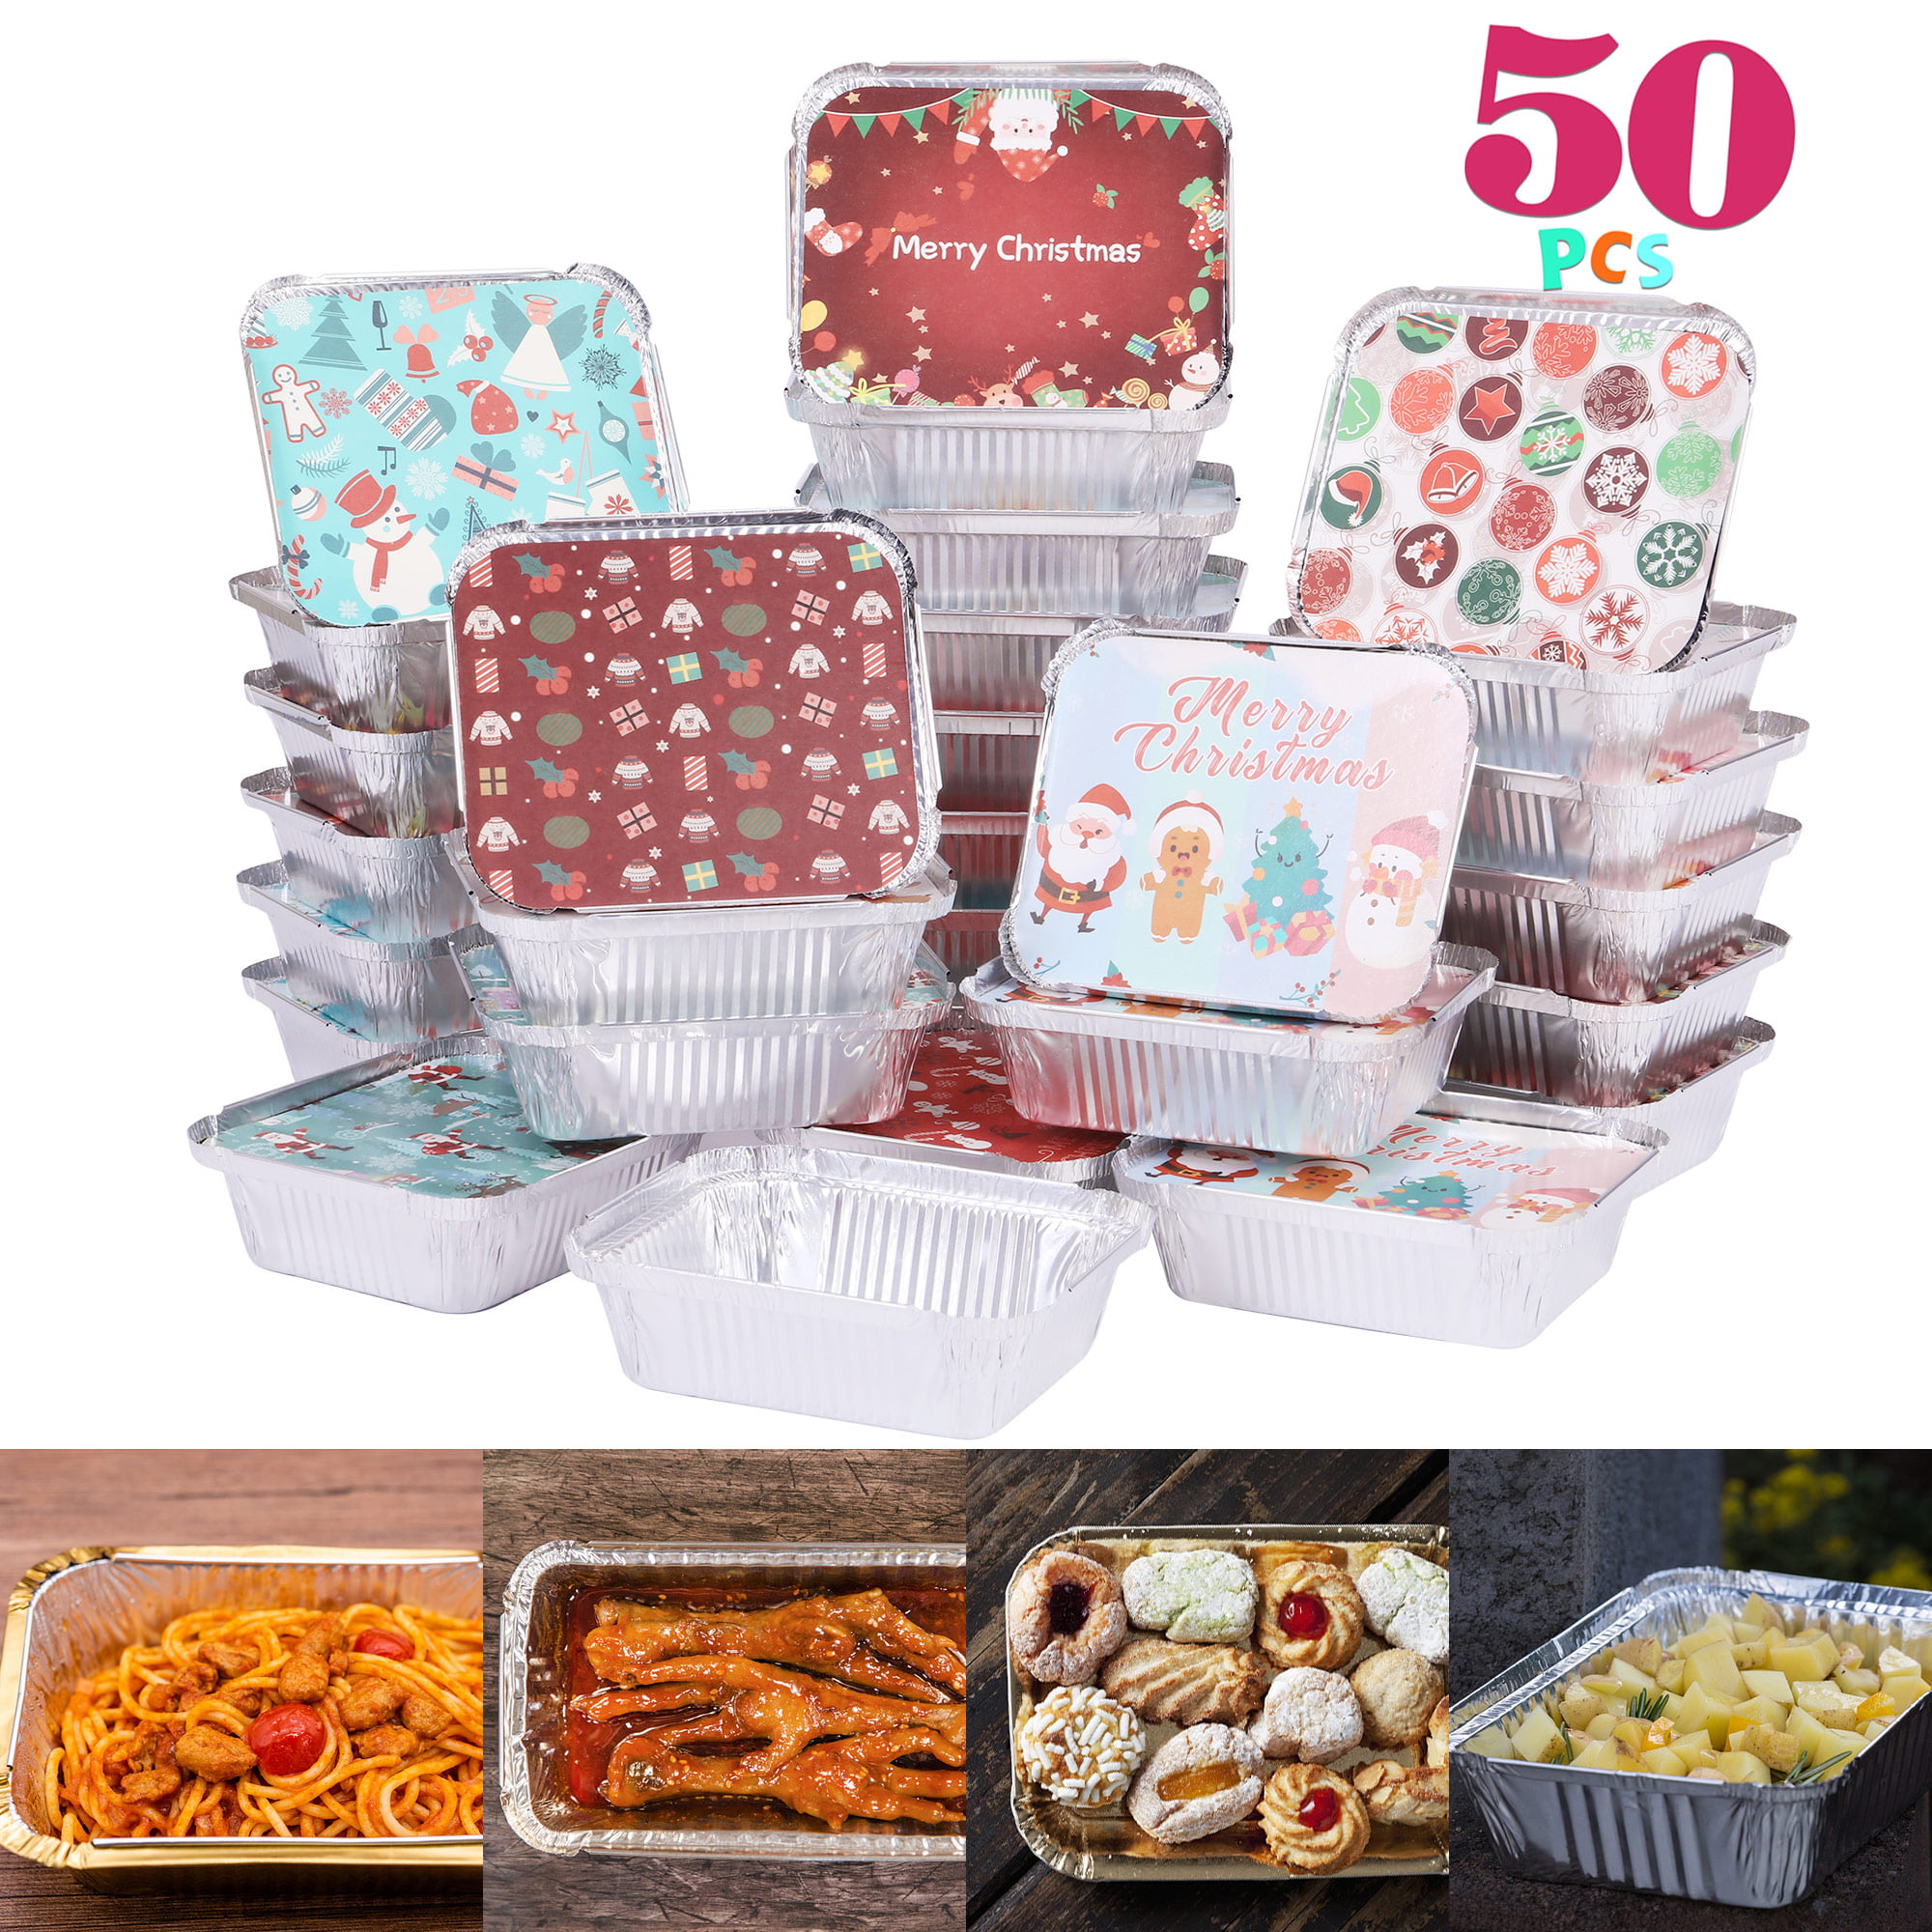  JOYIN 48 Pcs Christmas Cookie Tins with Lids for Gift Giving,  Rectangular Treat Foil Containers, Tupperware Disposable Food Storage Pan  for Holiday Leftovers Goodie Container or Cookie Exchange: Home & Kitchen